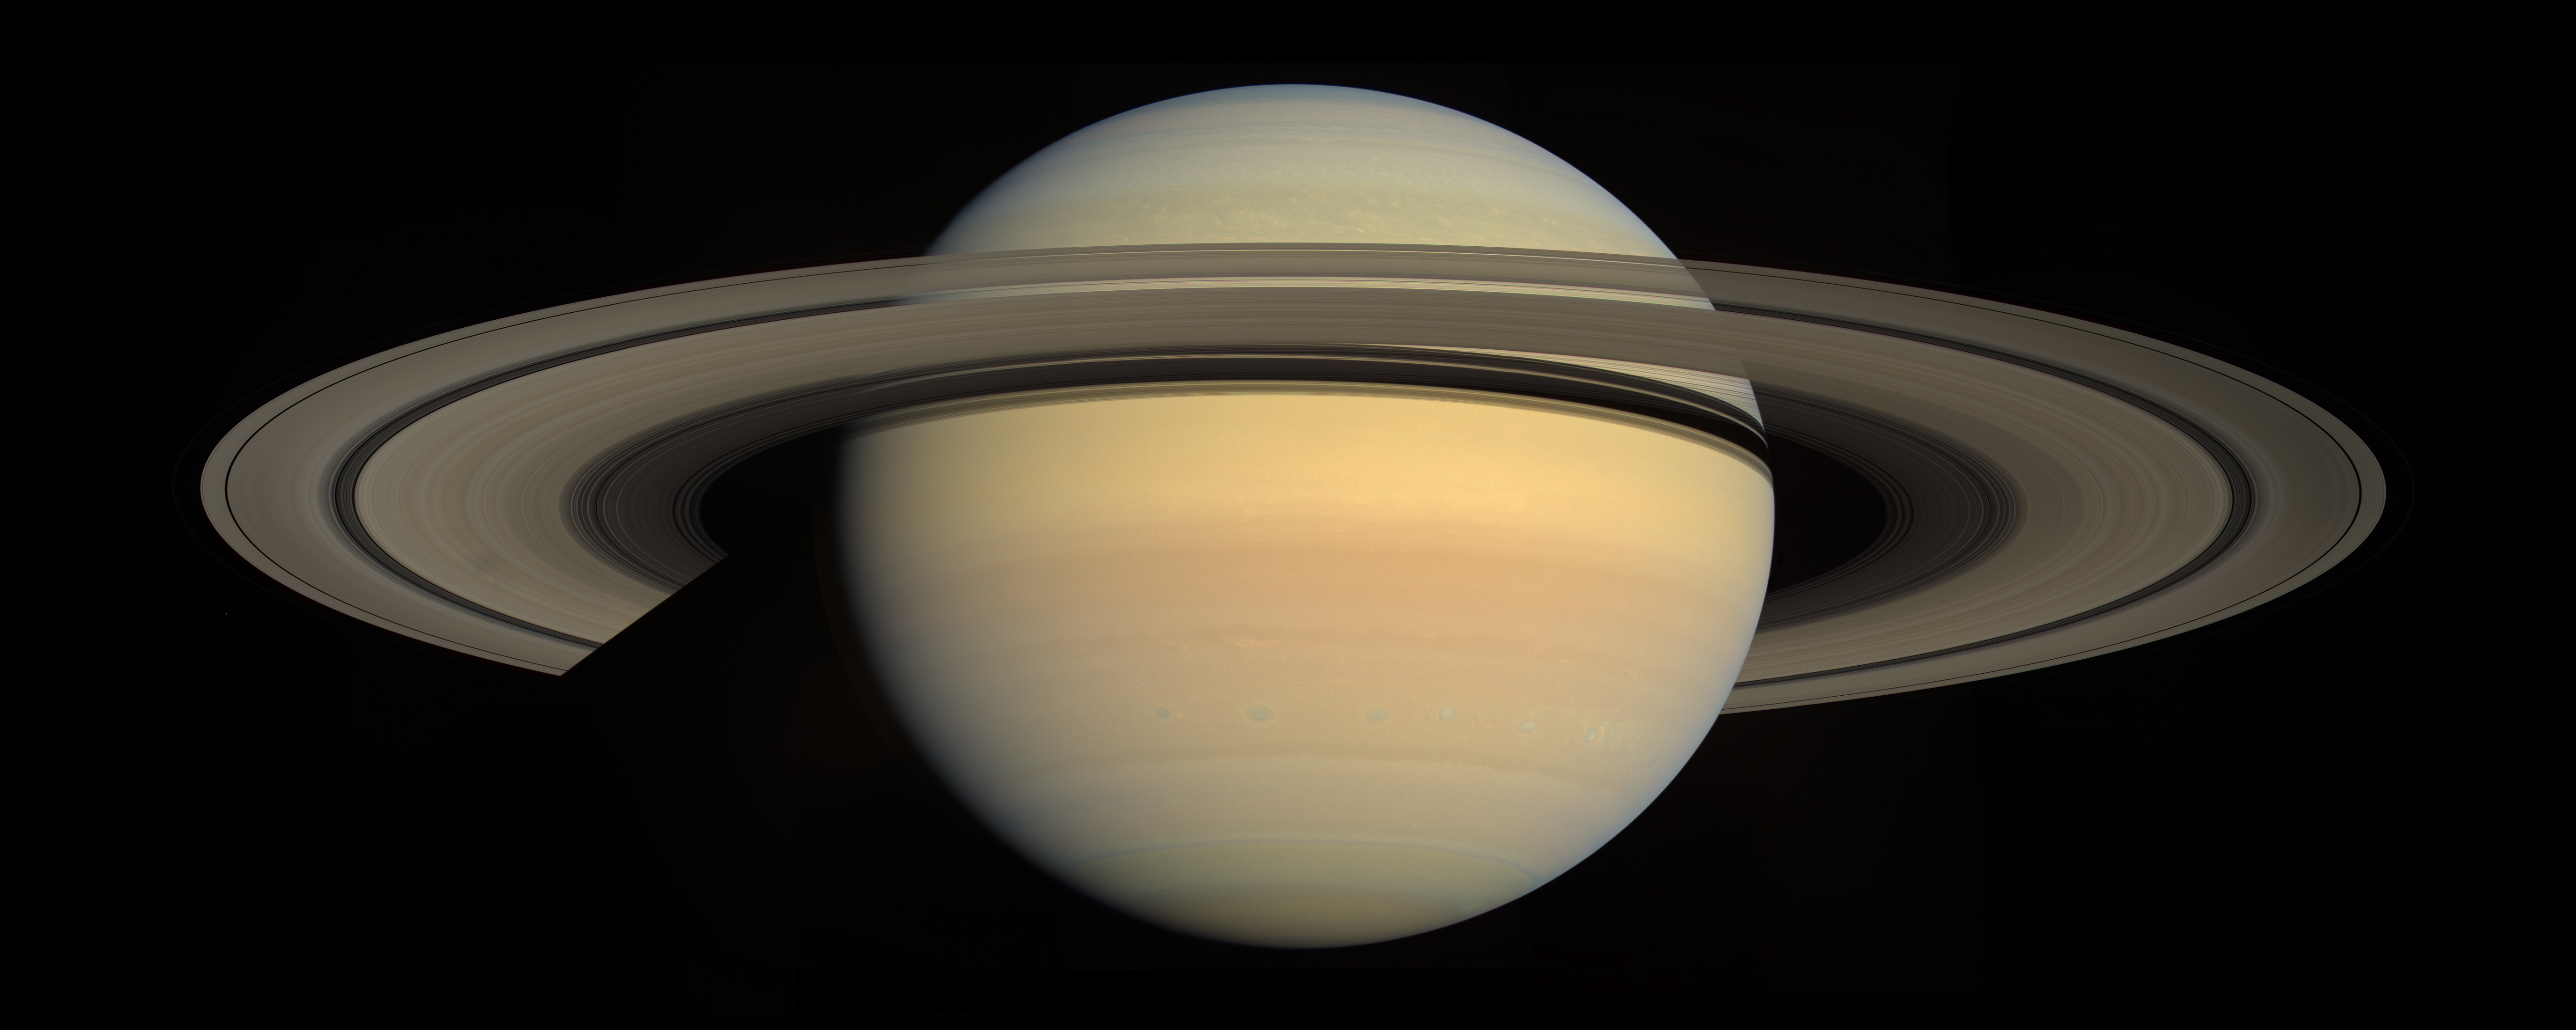 Saturn global view from Cassini, rings open The Society